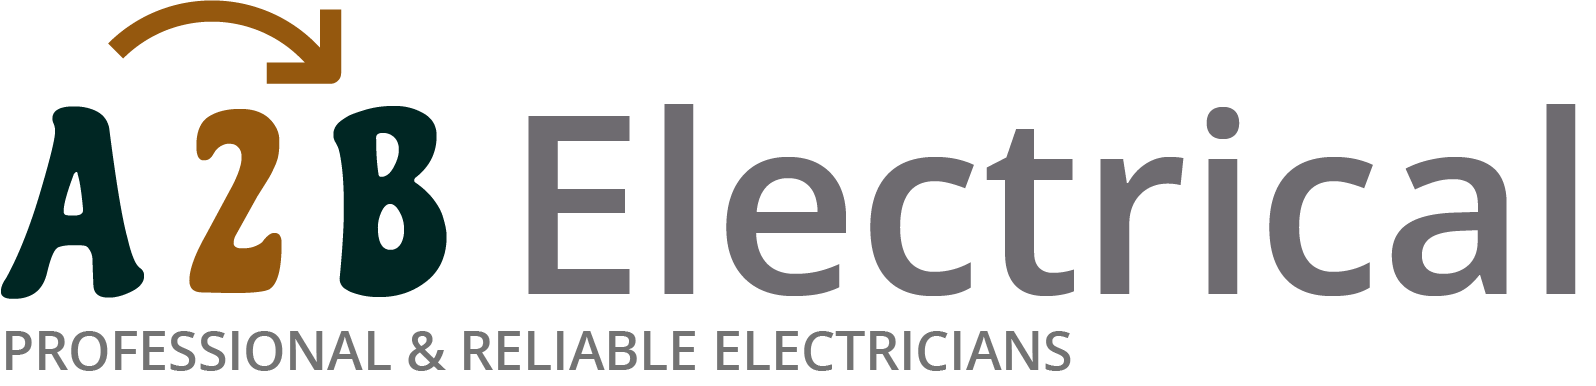 If you have electrical wiring problems in Clacton, we can provide an electrician to have a look for you. 